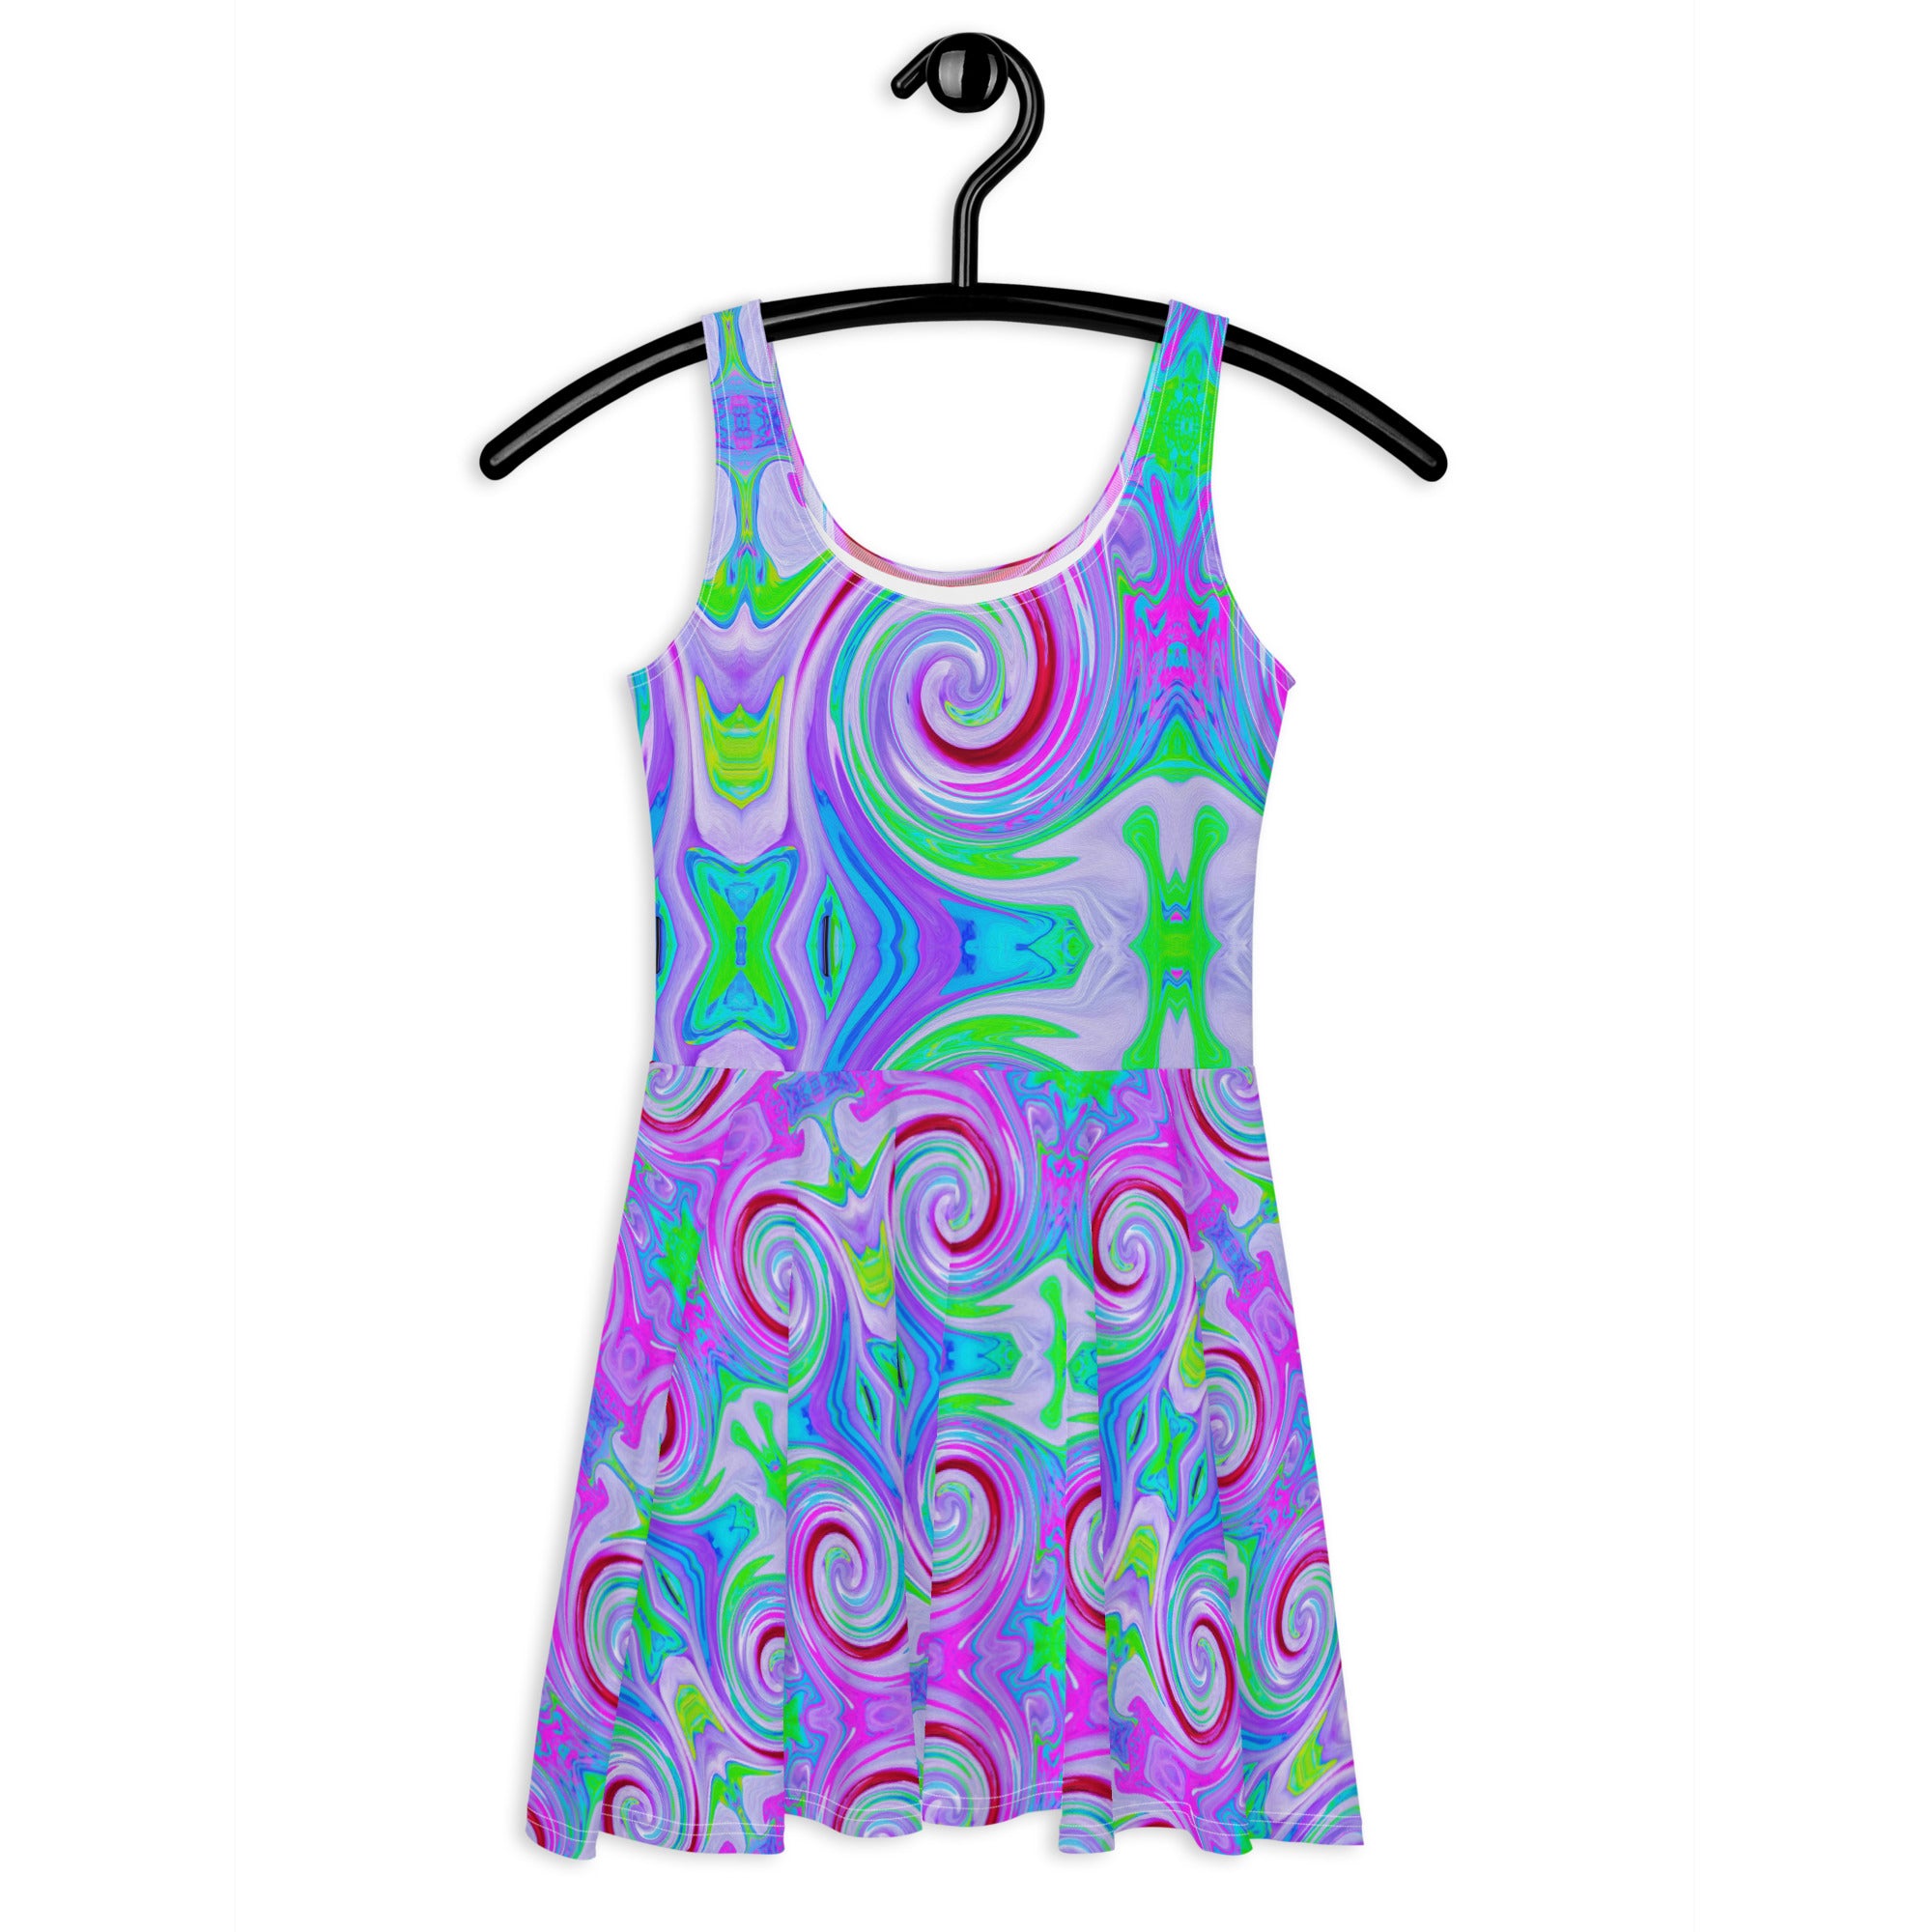 Flared Skater Dress - Groovy Abstract Red Swirl on Purple and Pink